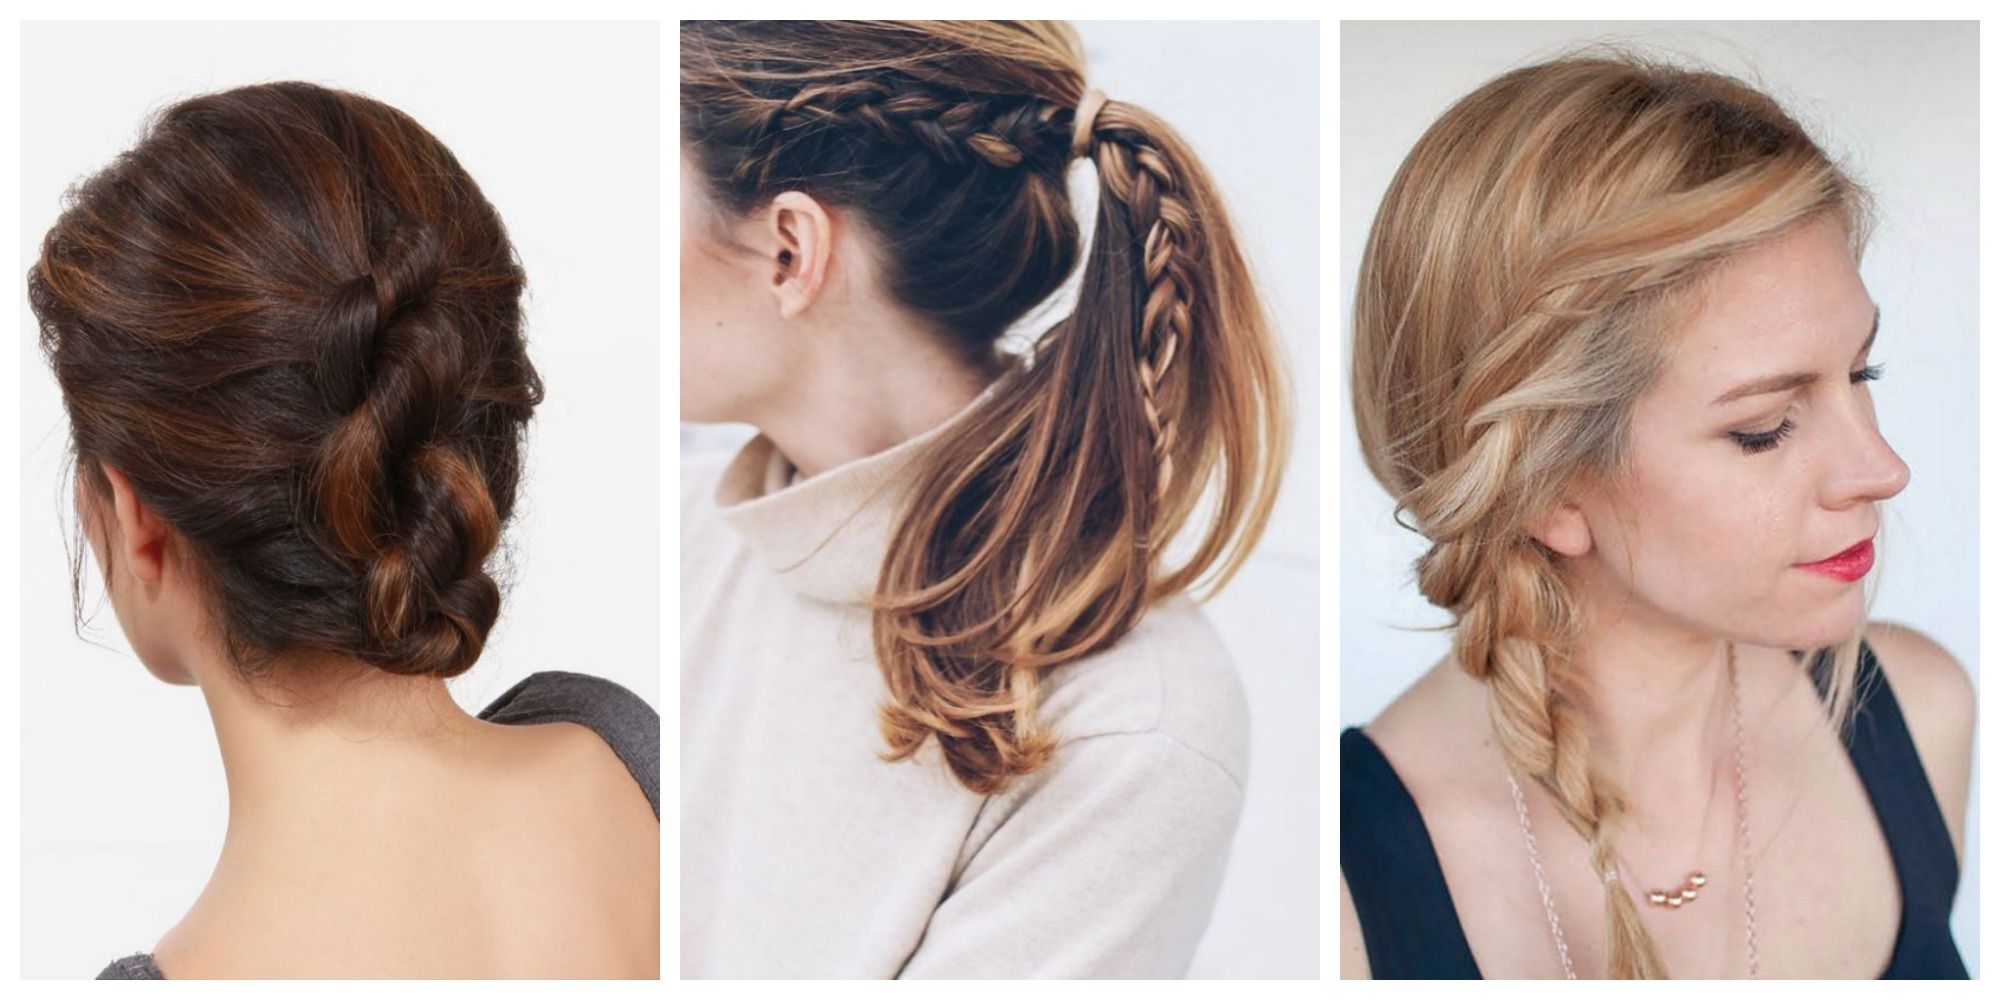 Easy Summer Hairstyles - Stylish Life for Moms